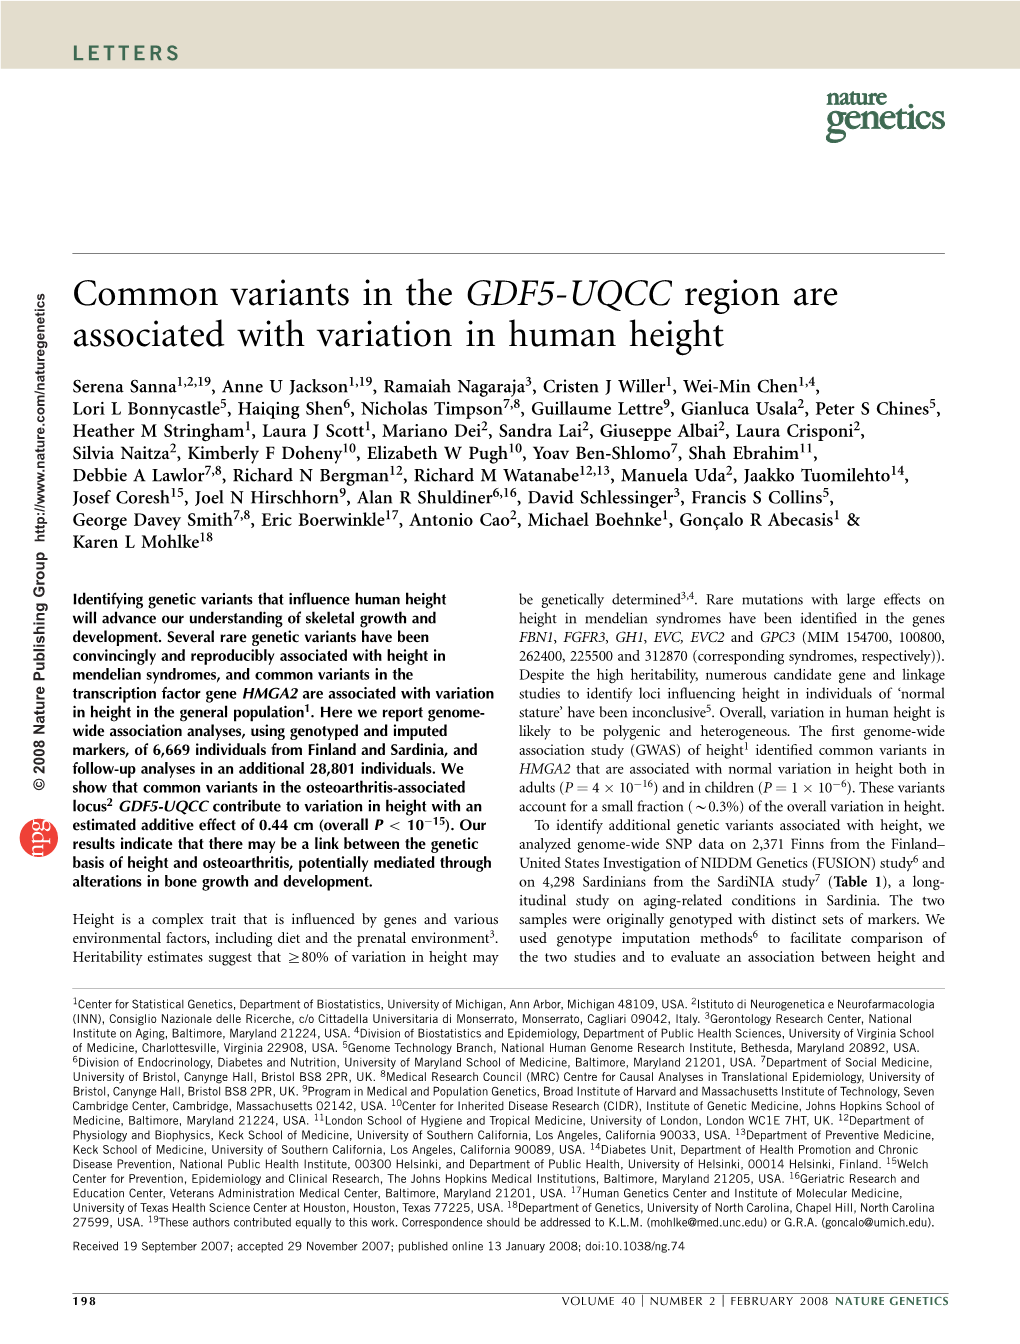 Common Variants in the GDF5-UQCC Region Are Associated with Variation in Human Height